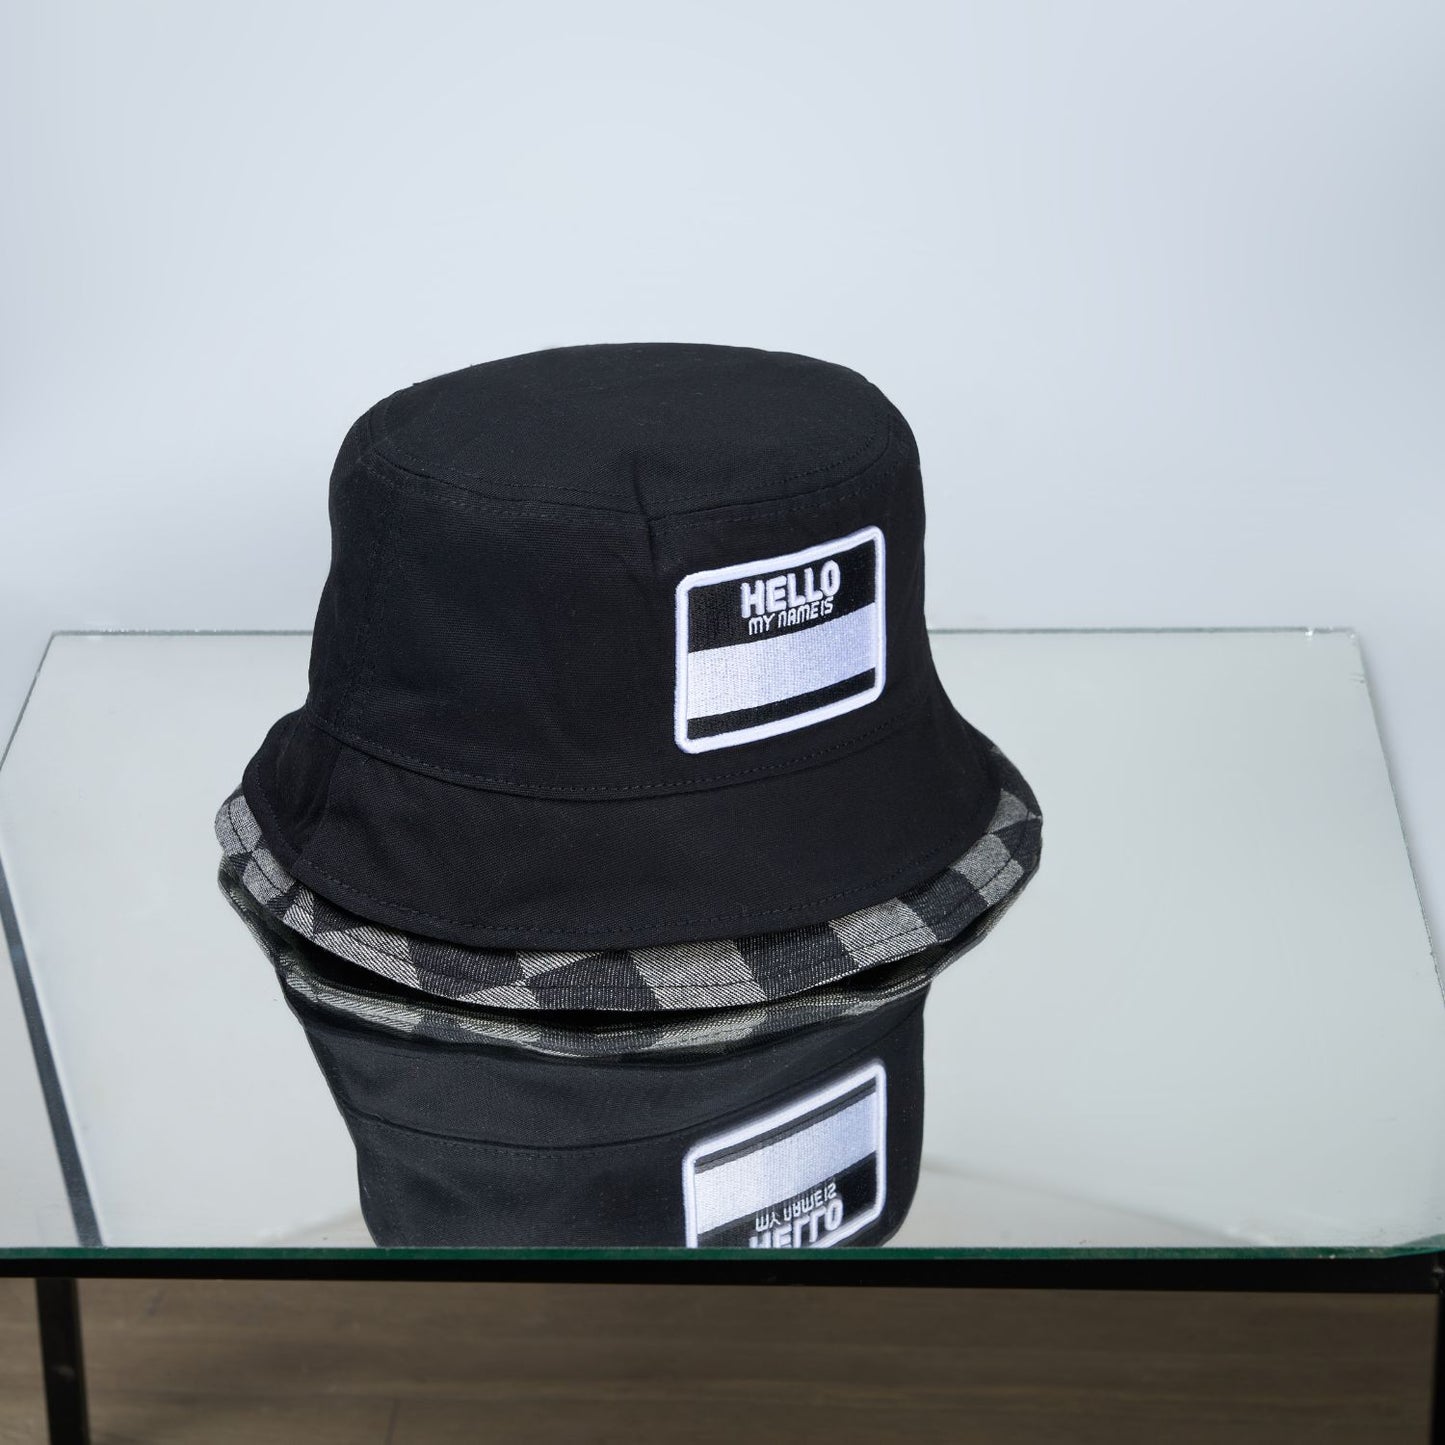 Black colored, chequered pattern, lightweight bucket hat for men, front design.